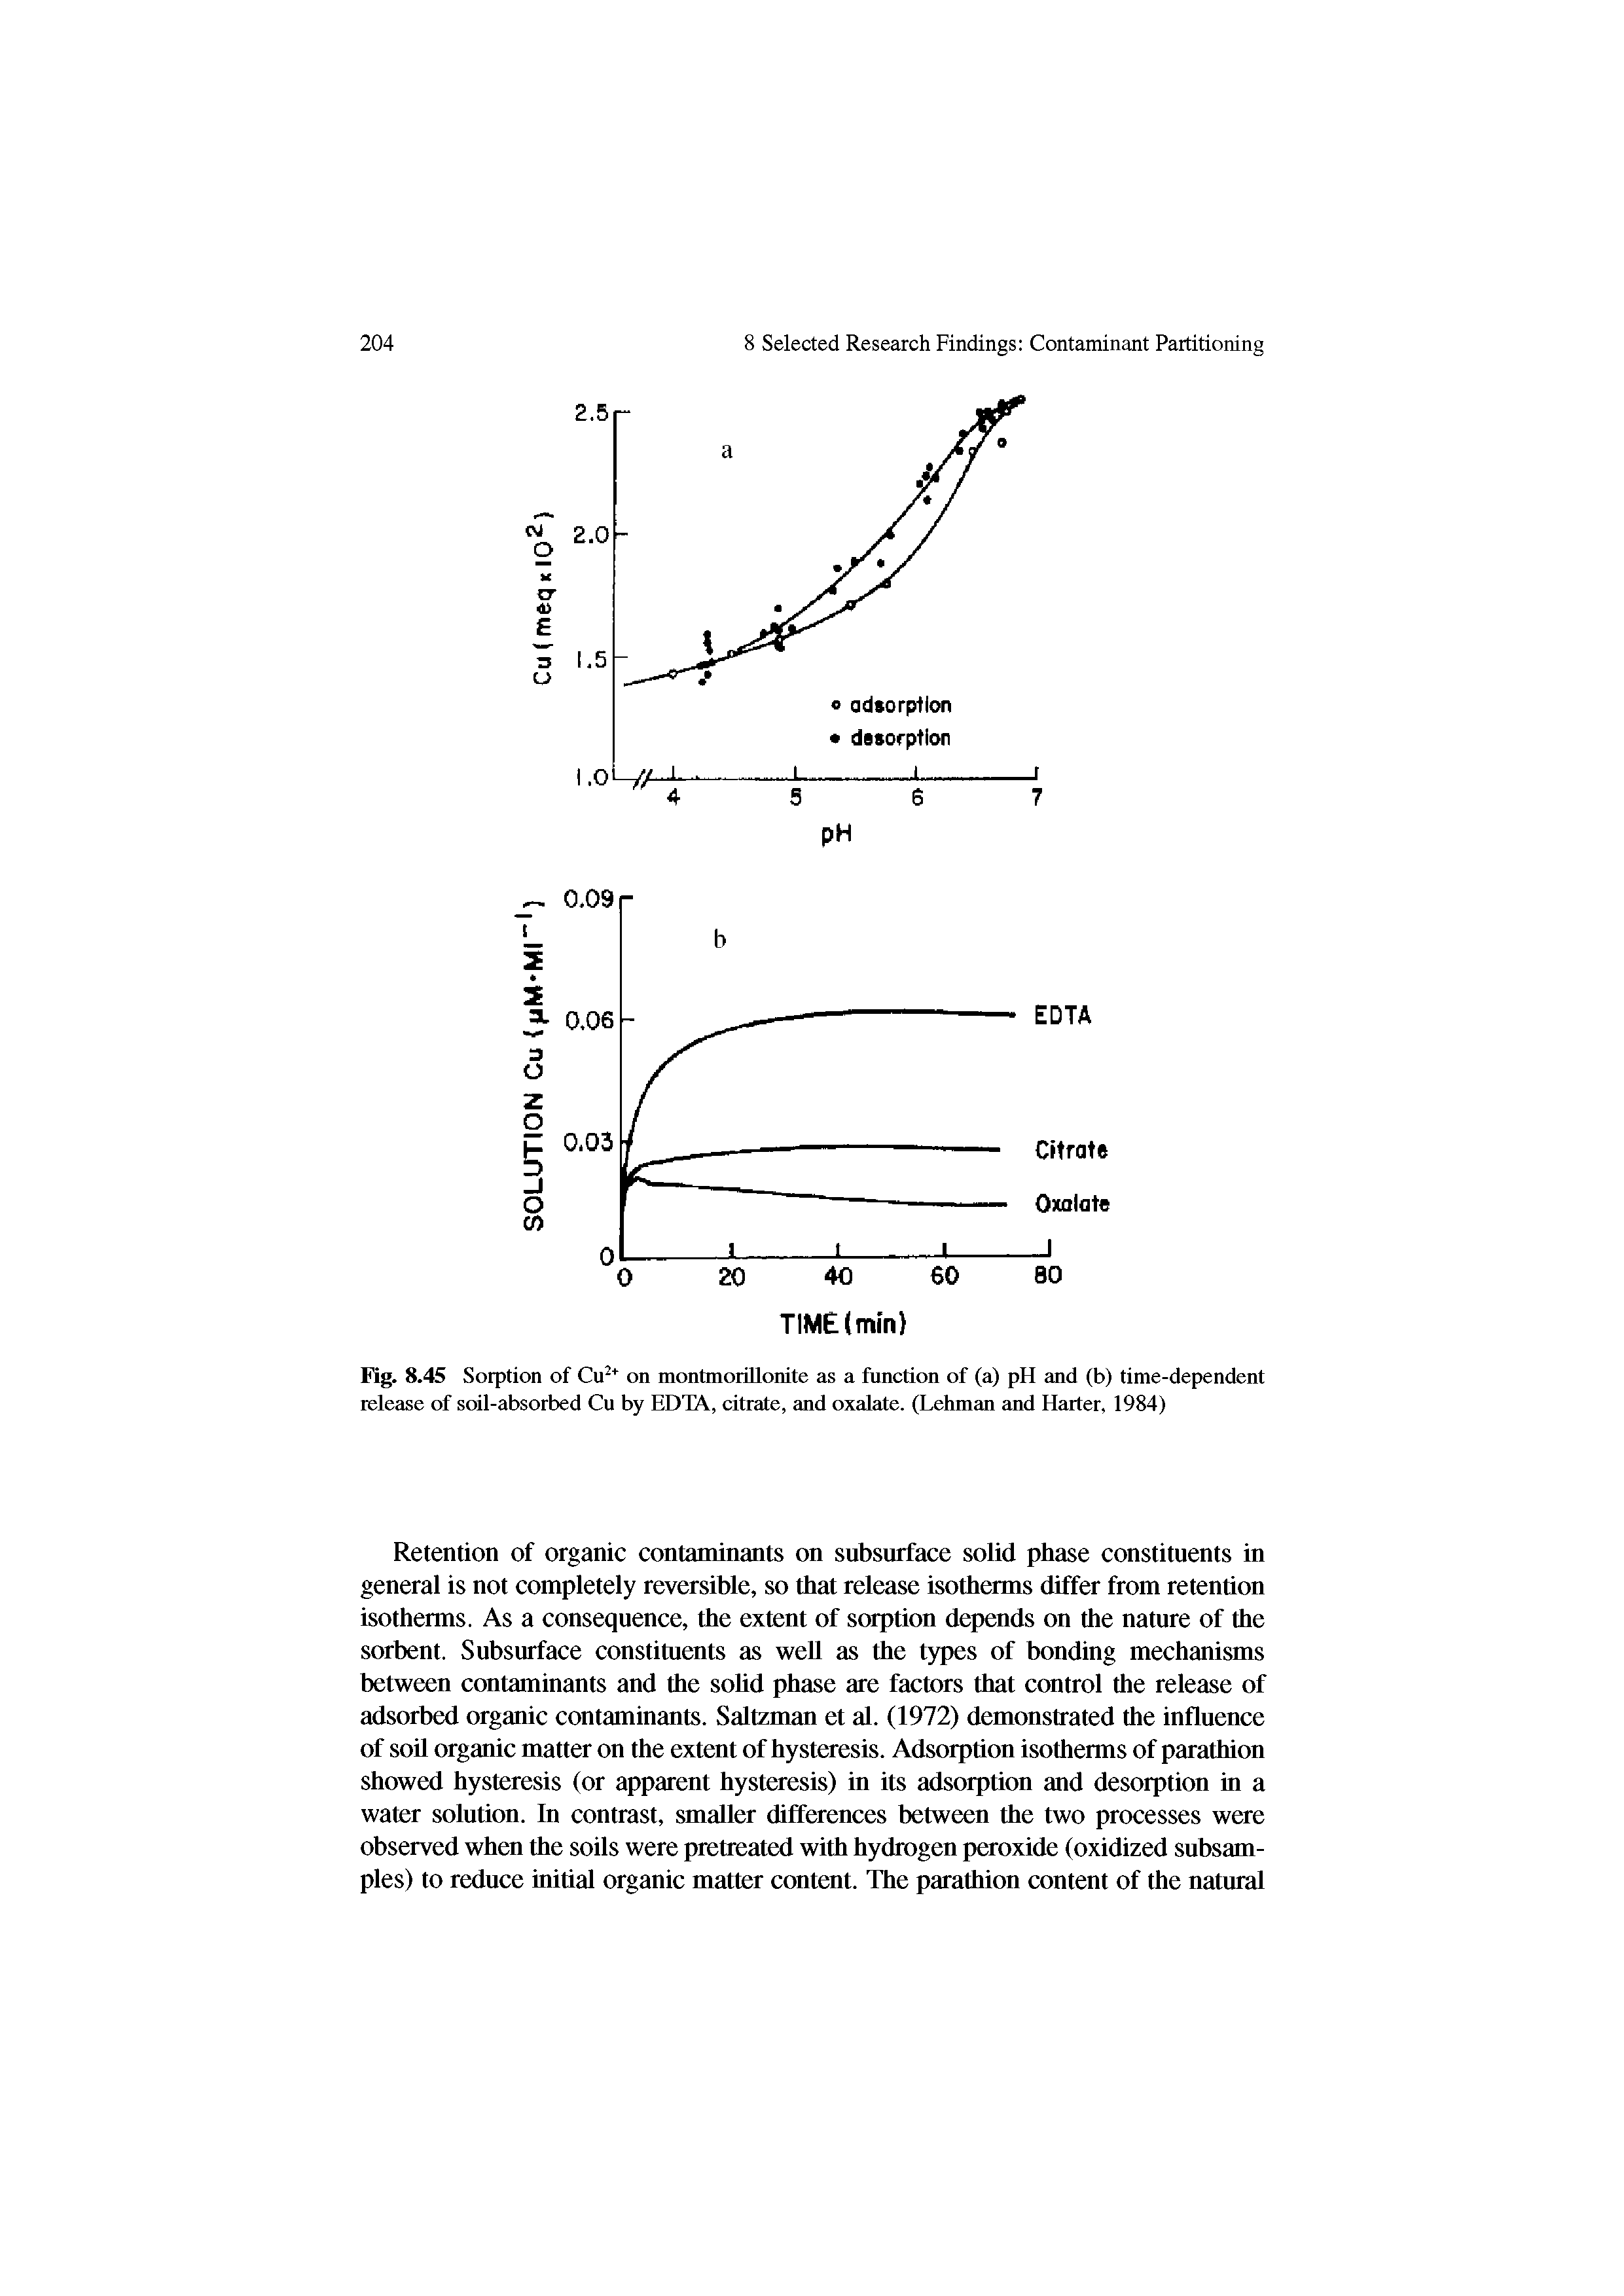 Fig. 8.45 Sorption of Cu on montmoriilonite as a function of (a) pH and (b) time-dependent release of soil-absorbed Cu by EDTA, citrate, and oxalate. (Lehman and Harter, 1984)...